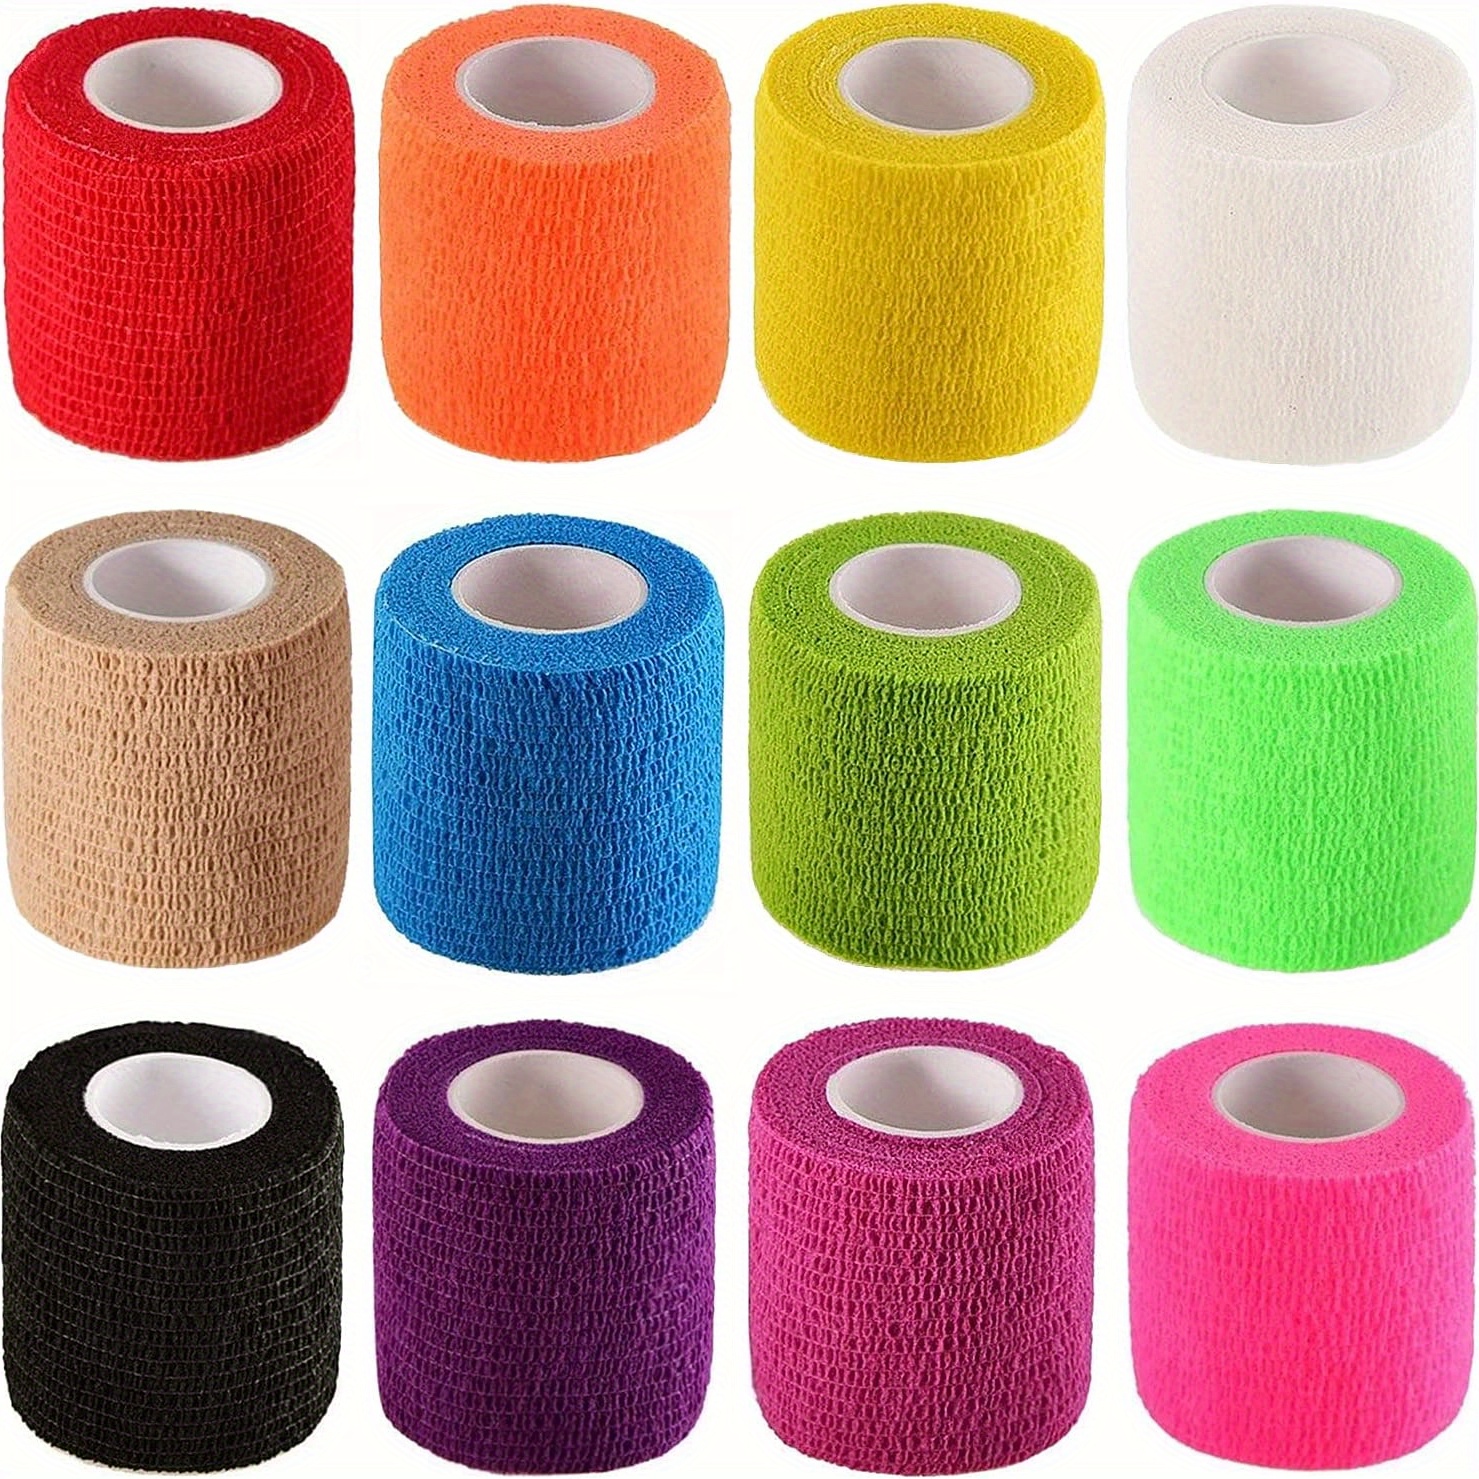 Pangda 12 Pieces Adhesive Bandage Wrap Stretch Self-Adherent Tape for Sports Wrist Ankle 5 Yards Each (12 Colors 2 Inches)